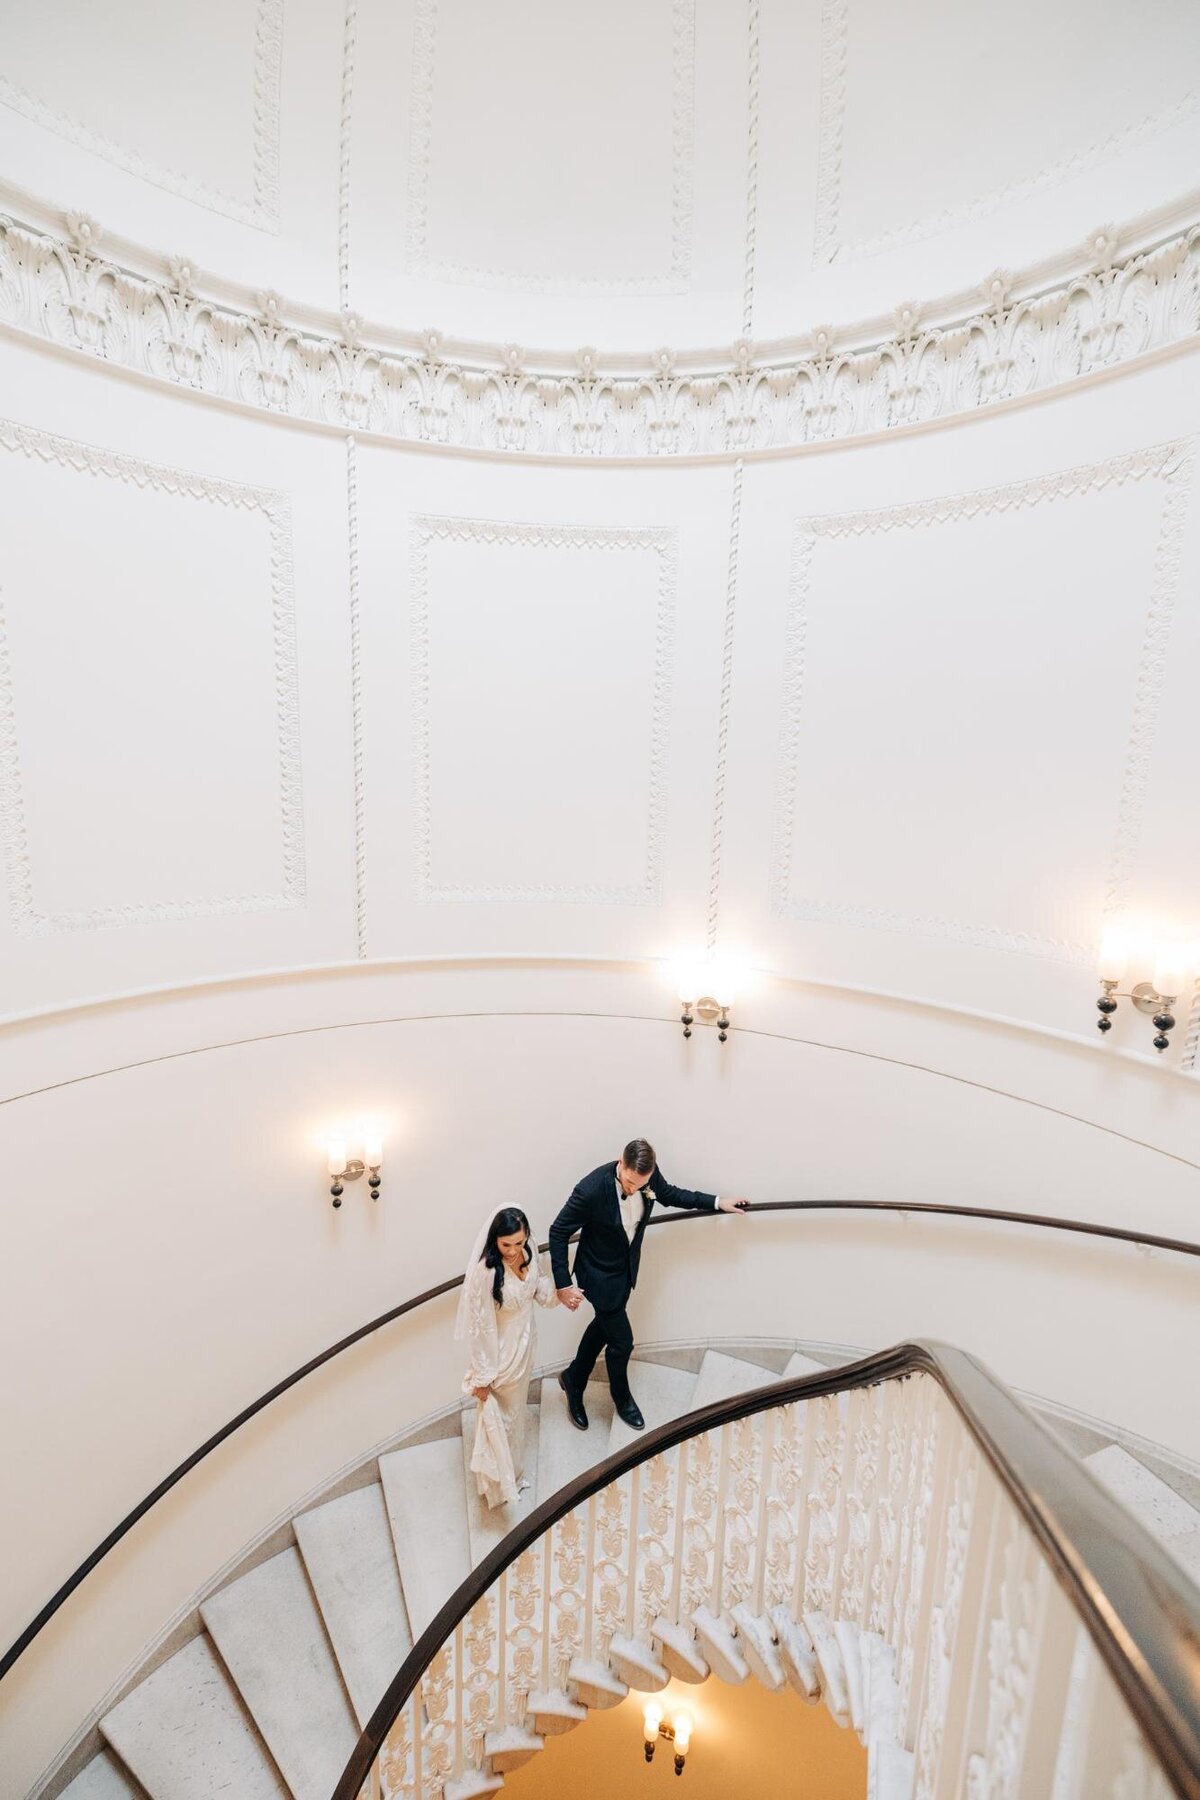 A couple holding hands while descending a grand spiral staircase in an elegant interior.